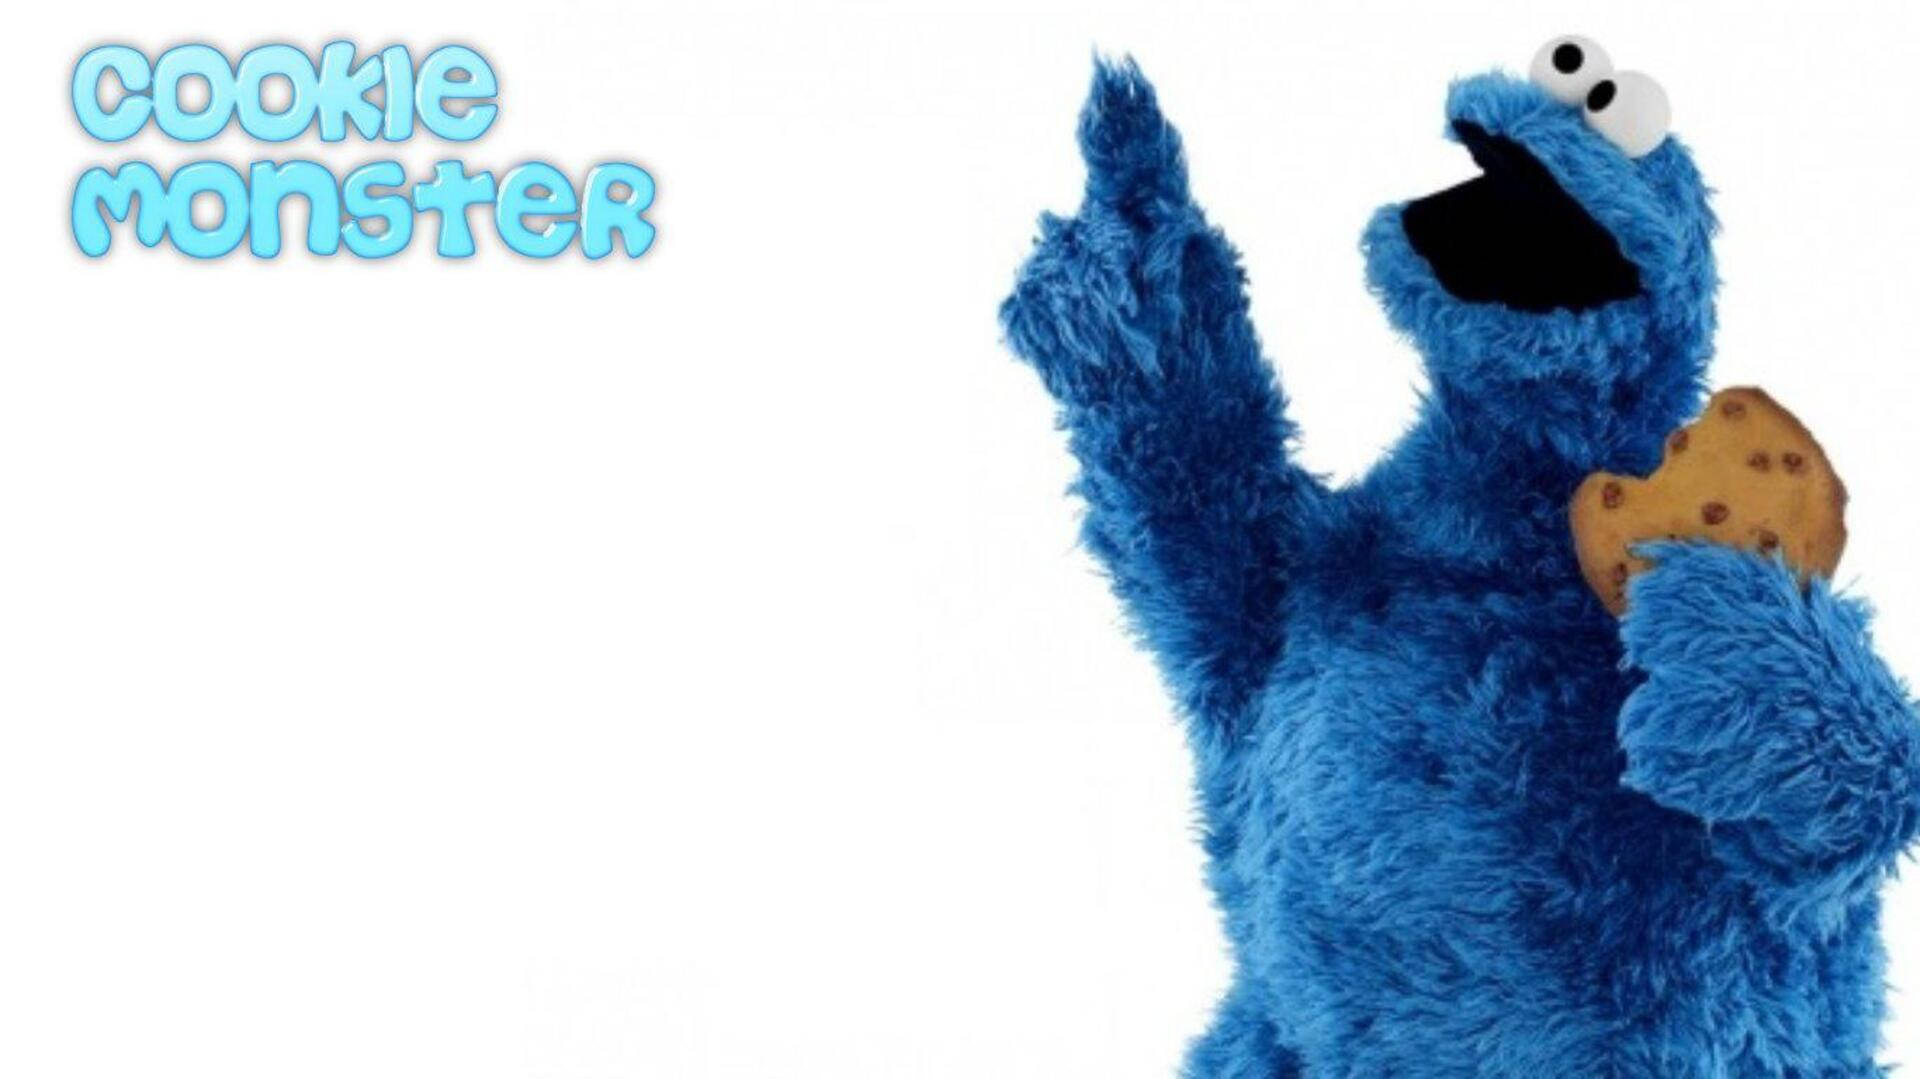 Funny Muppet Cookie Monster Background